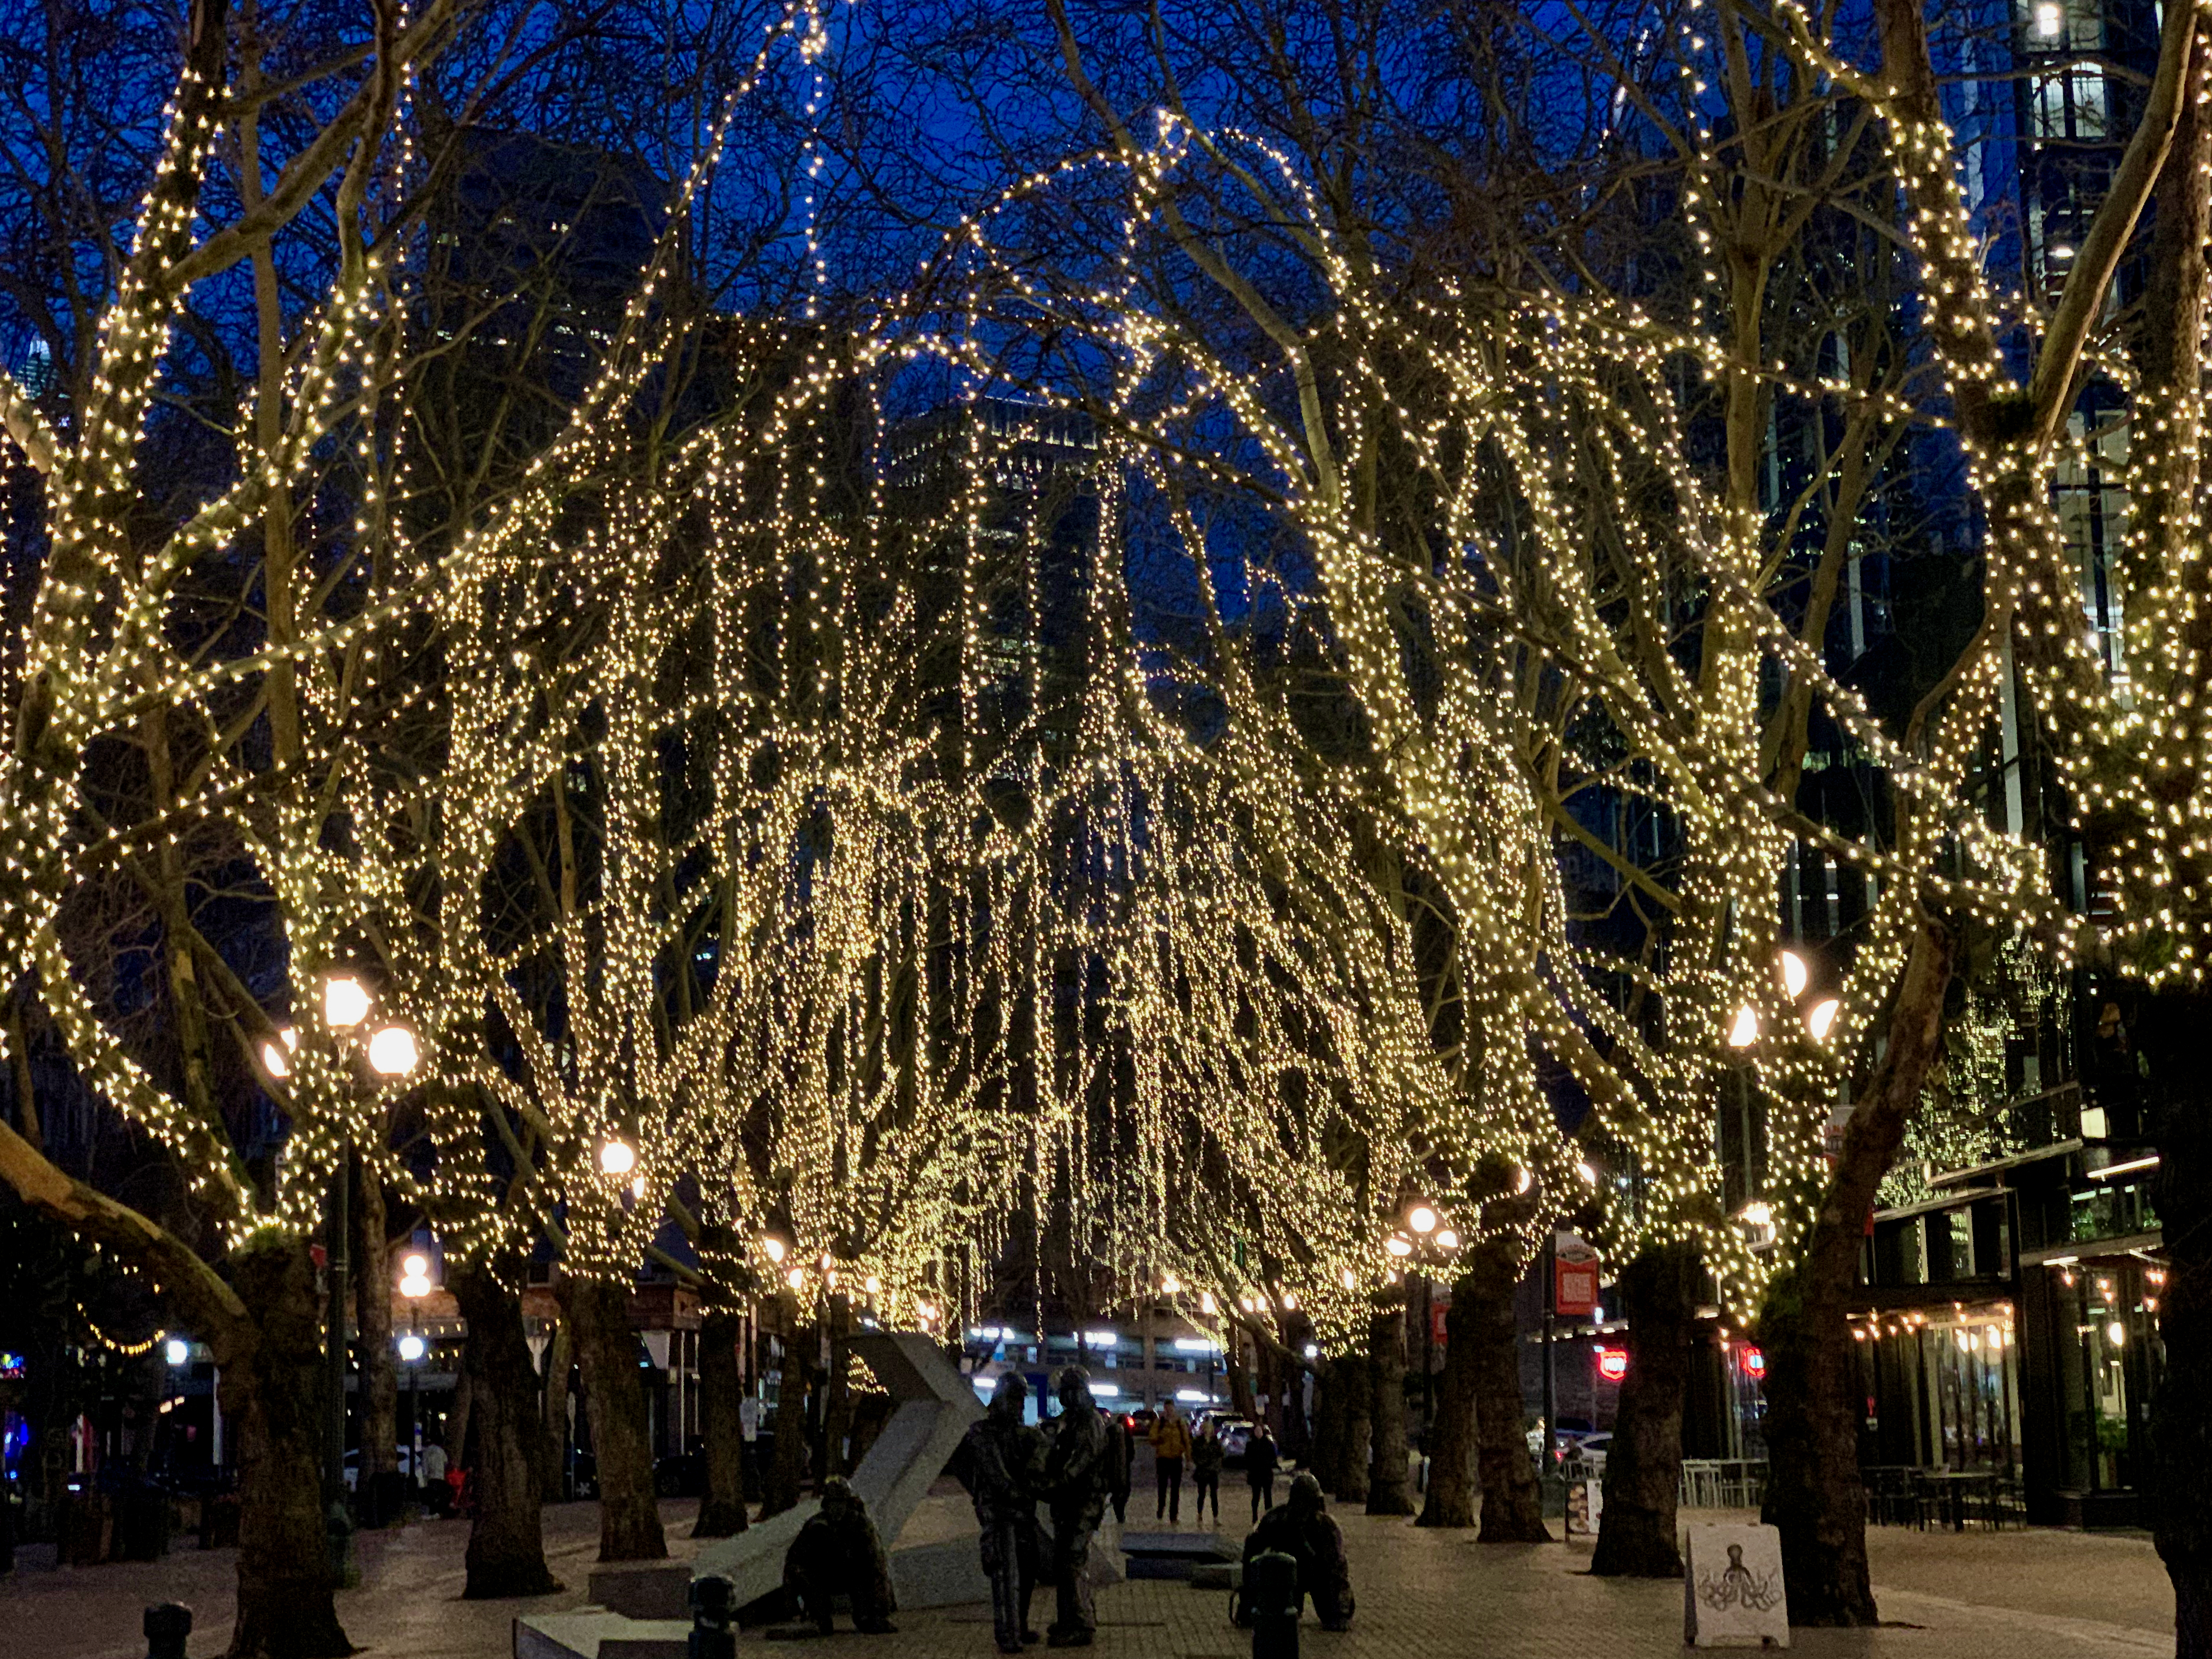 Day 27. <i>Together</i>. Community under lights in Pioneer Square.